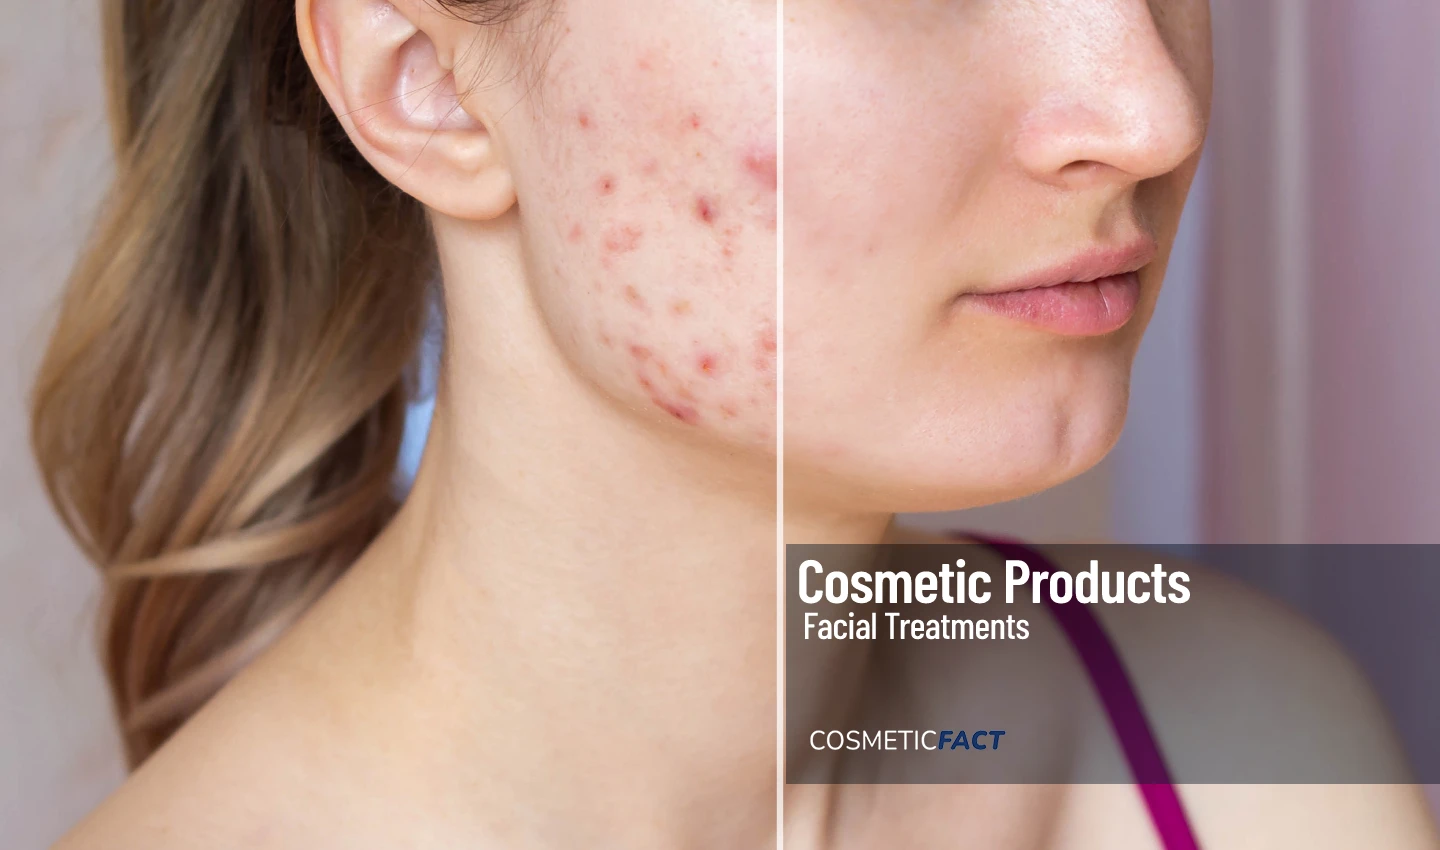 Cropped shot of a young woman's face before and after acne treatment, focusing on eliminating acne scars.